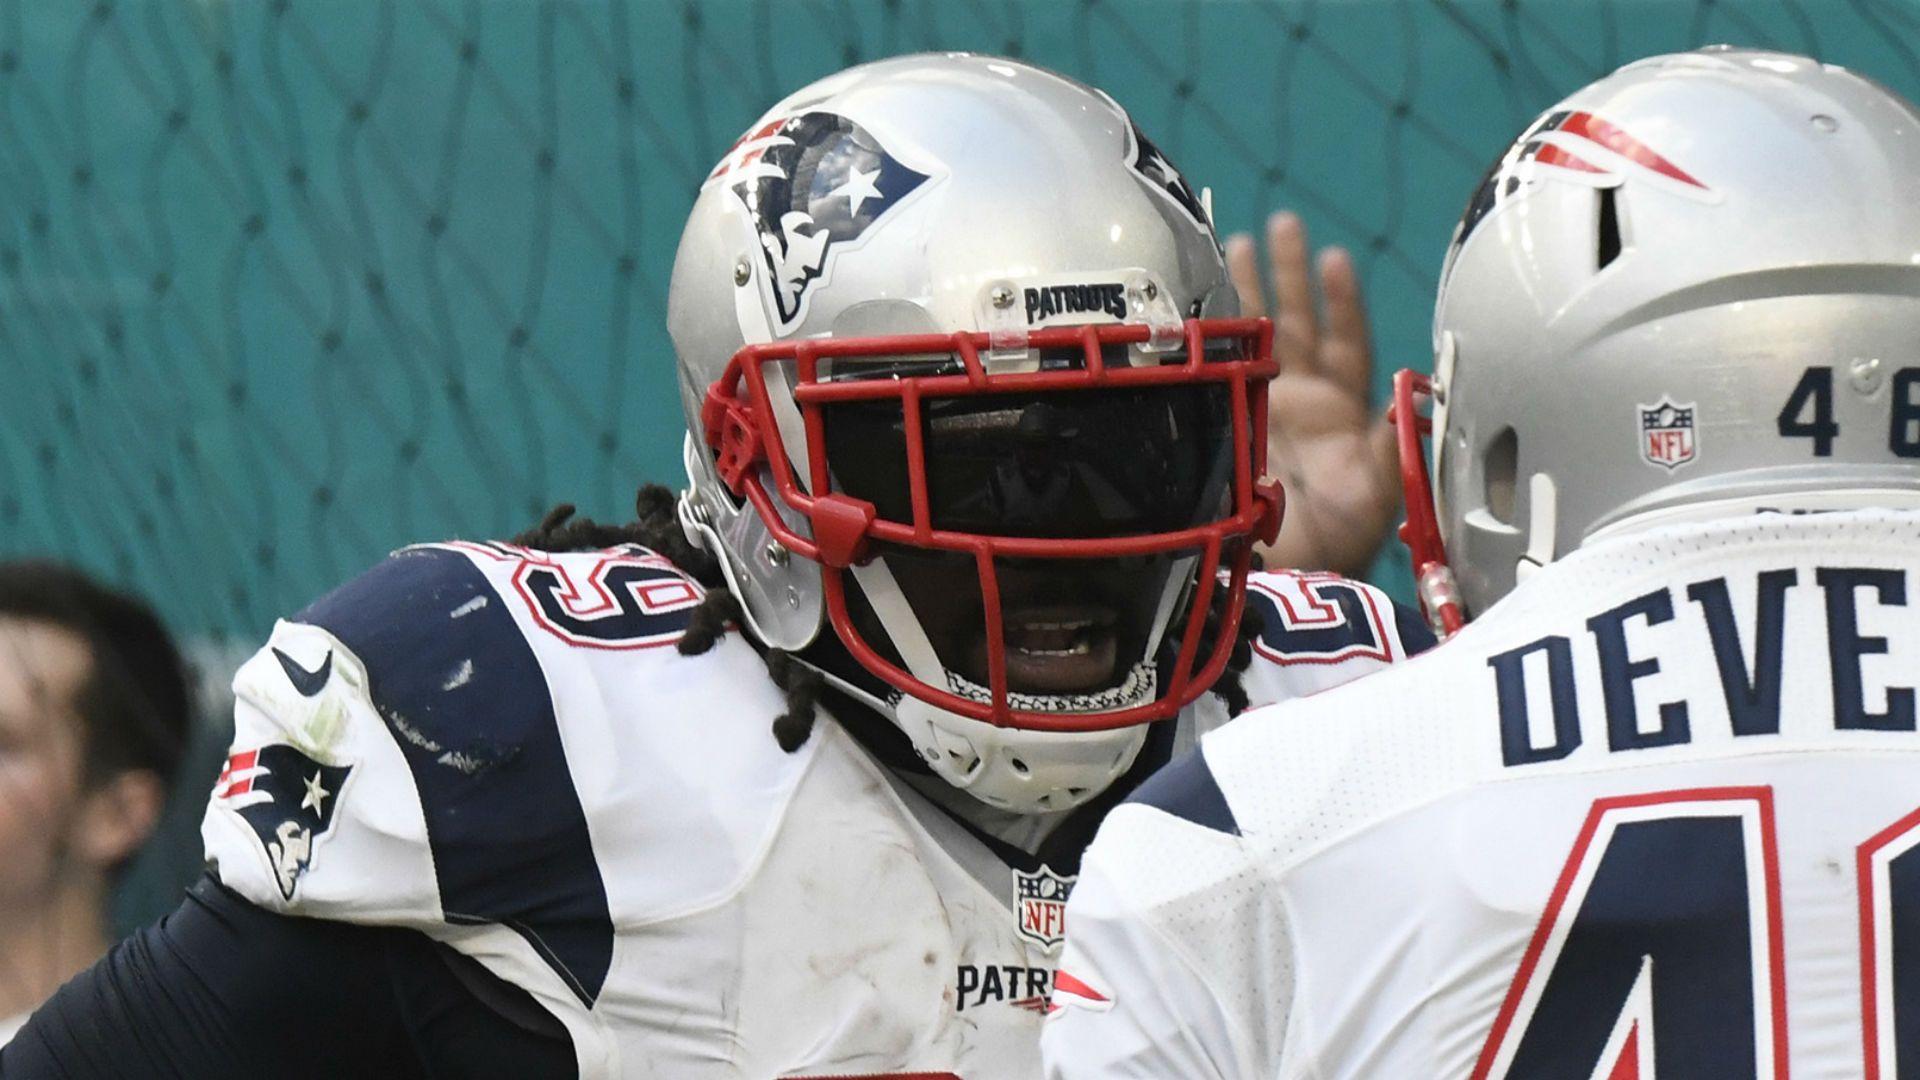 LeGarrette Blount Rips 'dirty' Ndamukong Suh After Dust Up. NFL